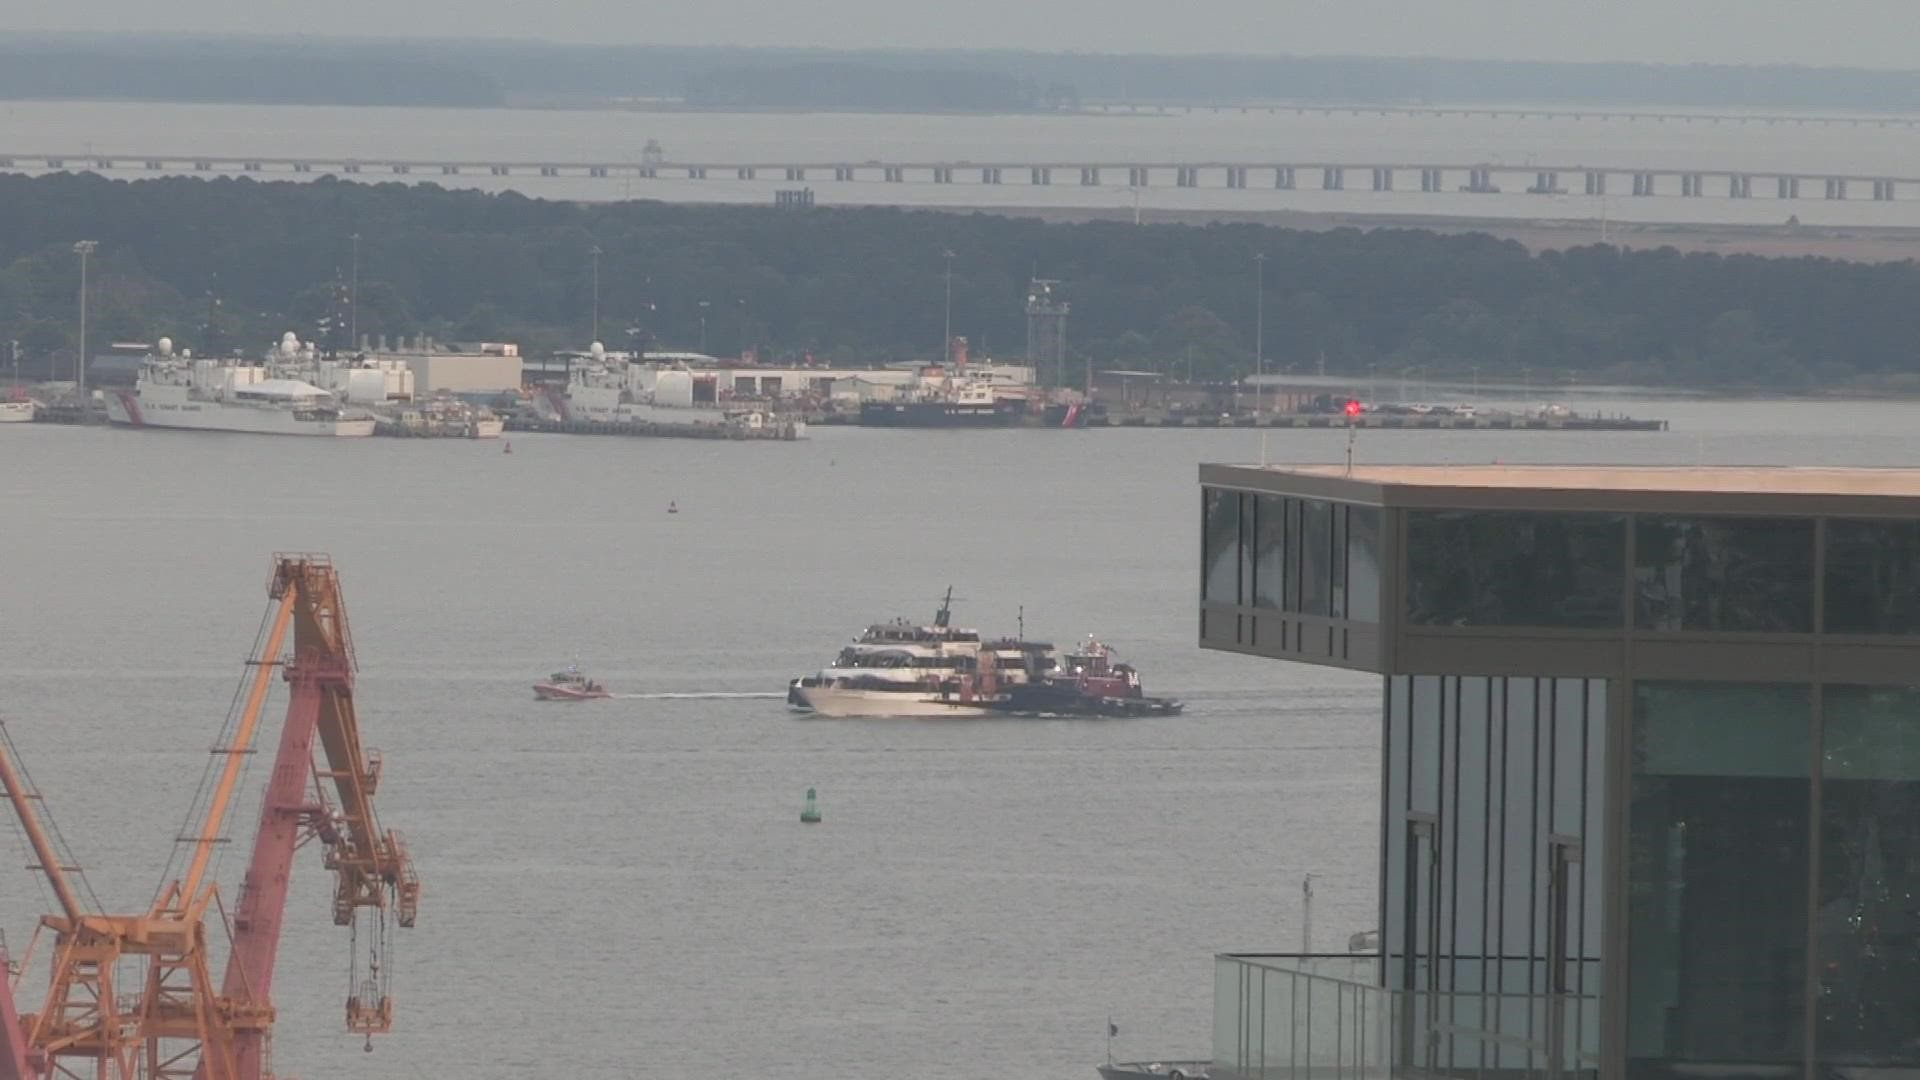 Watch the view from the 13News Now Tower Cam as the Spirit of Norfolk is towed down the Elizabeth River after catching fire days earlier.